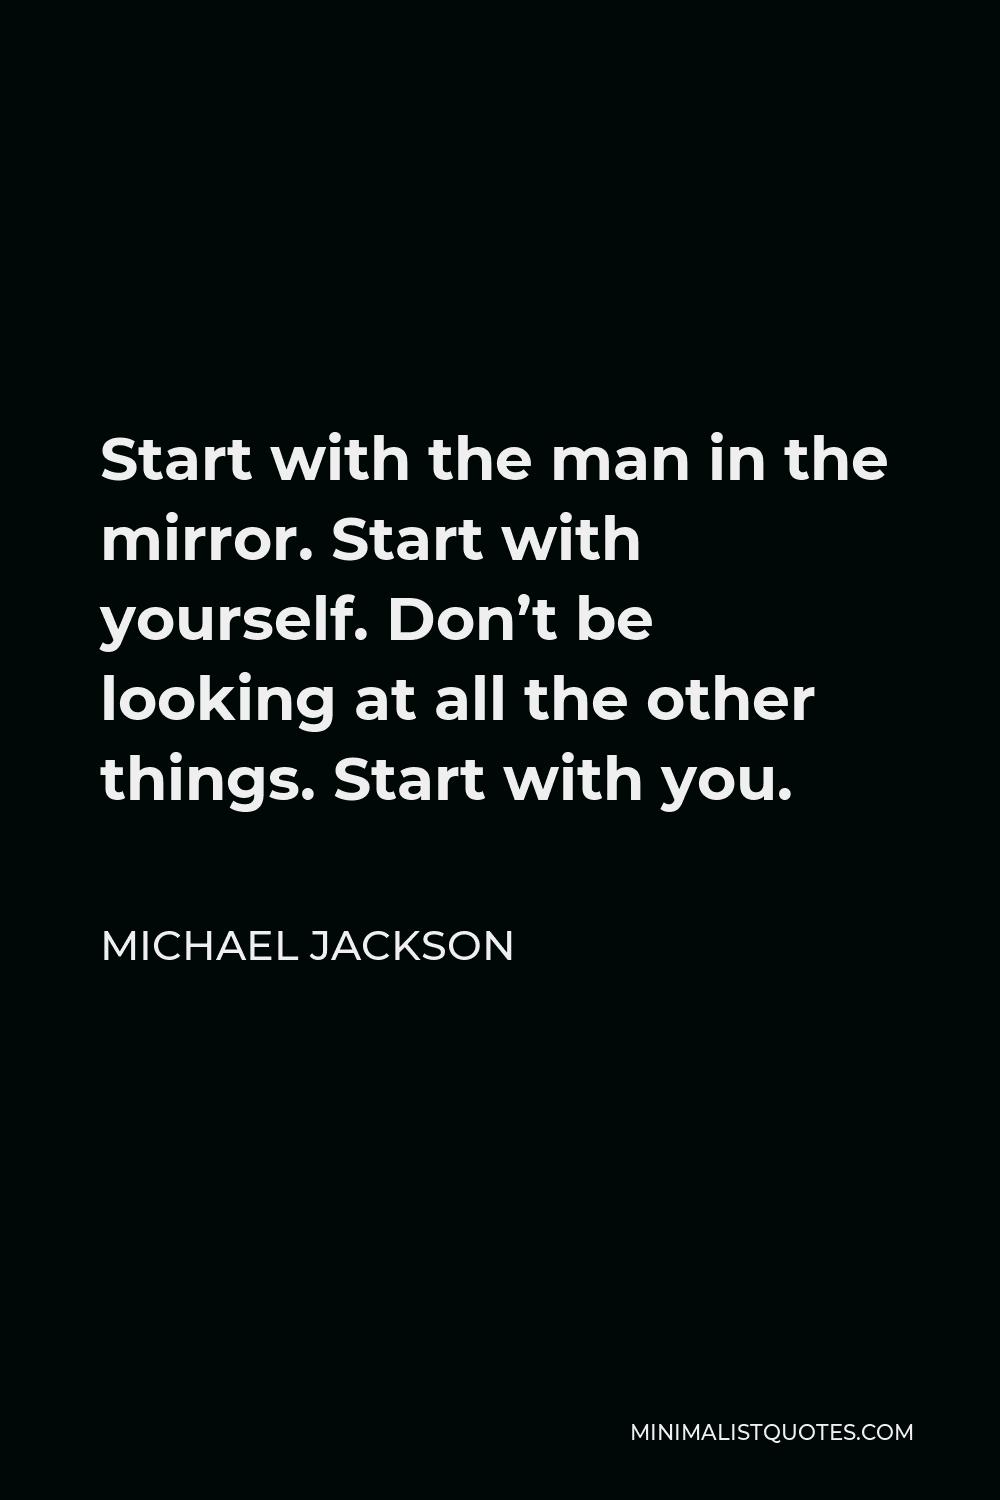 Michael Jackson Quote: Start With The Man In The Mirror. Start With Yourself. Don't Be Looking At All The Other Things. Start With You.